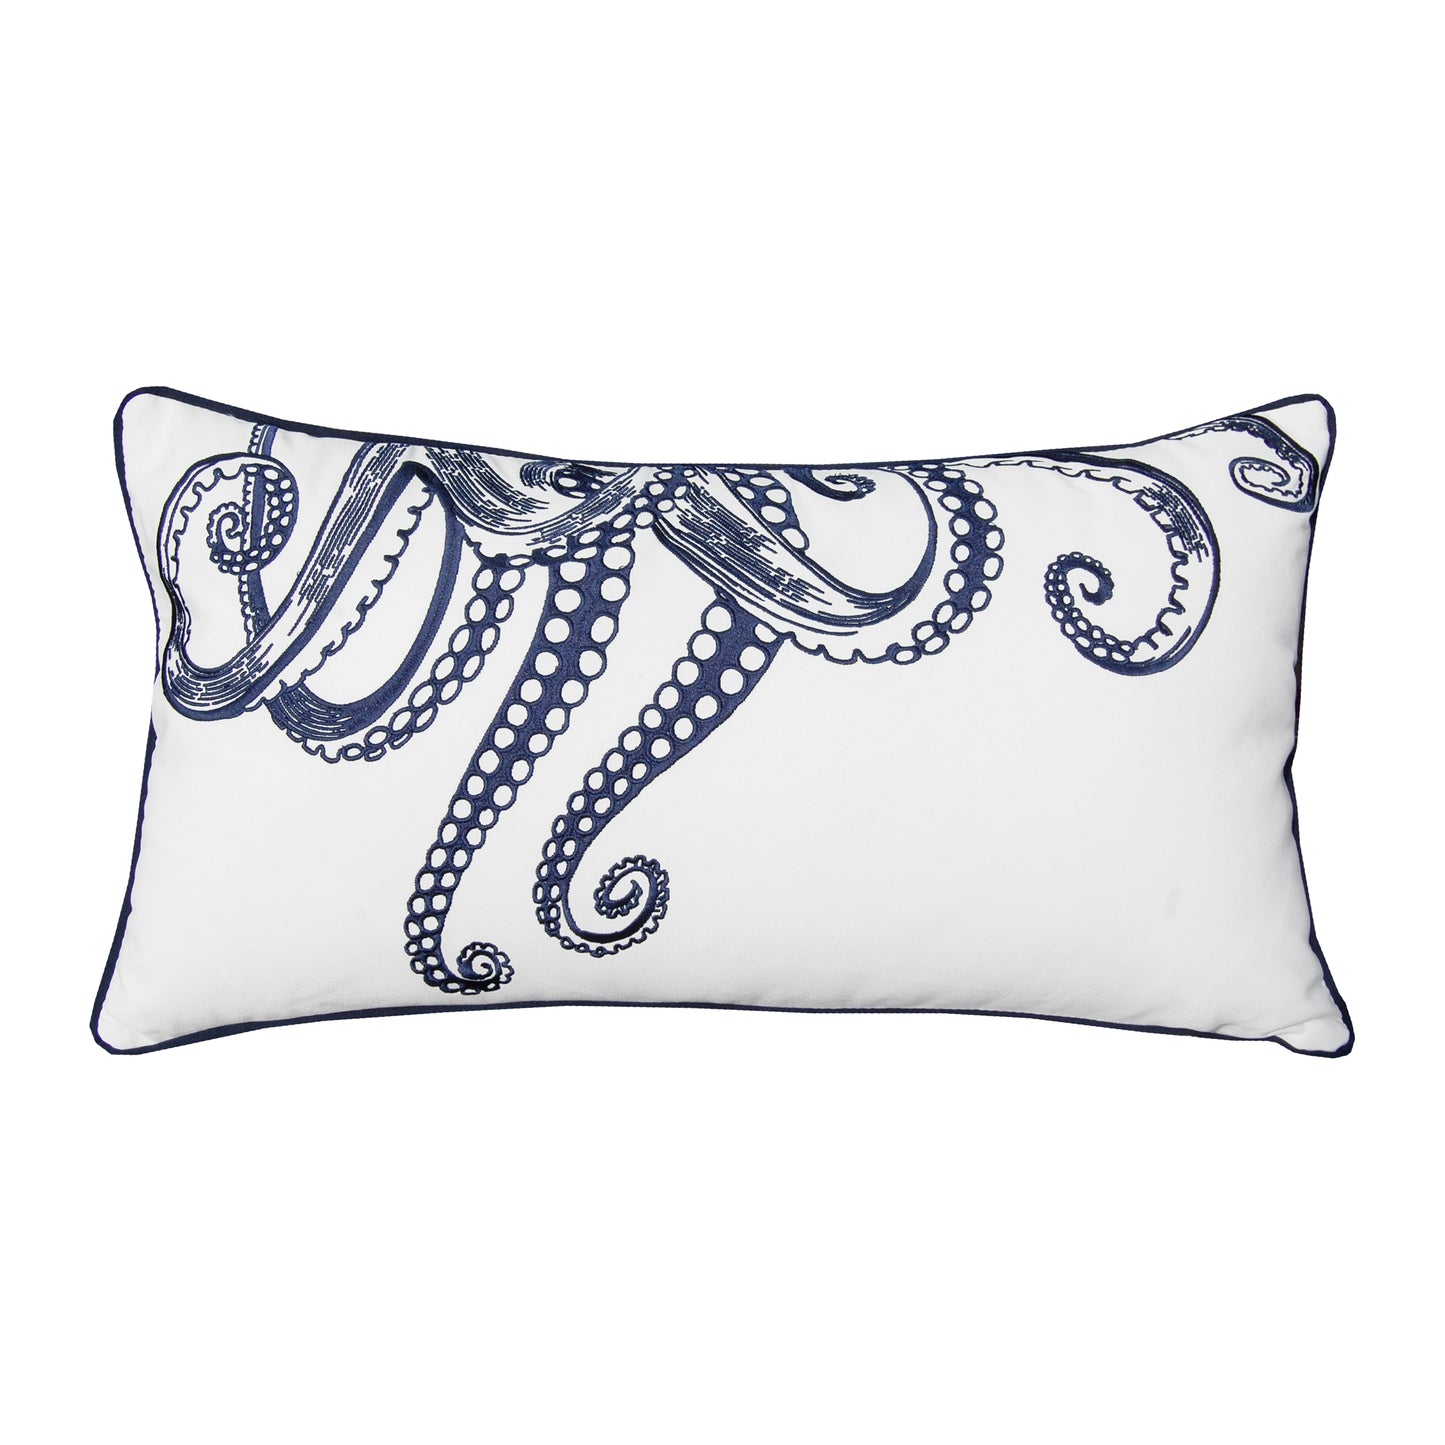 Navy blue octopus tentacles embroidered on a white background. Pillow finished with navy blue piped edging.